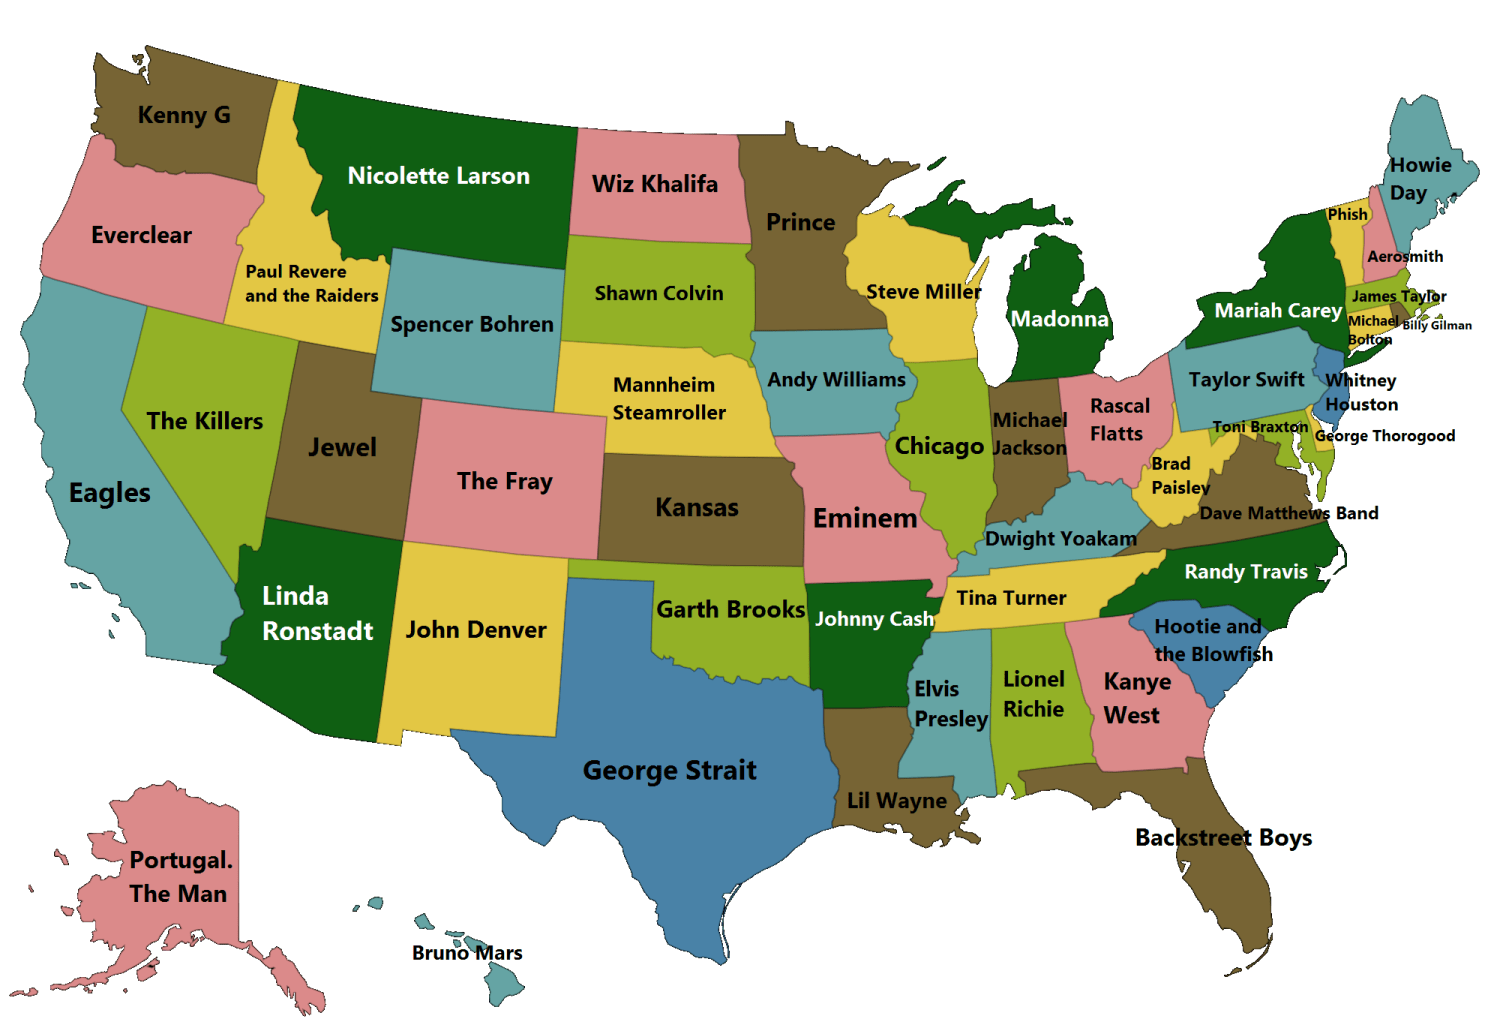 Highest Grossing Singer, Music Artist or Band from Each U.S. State